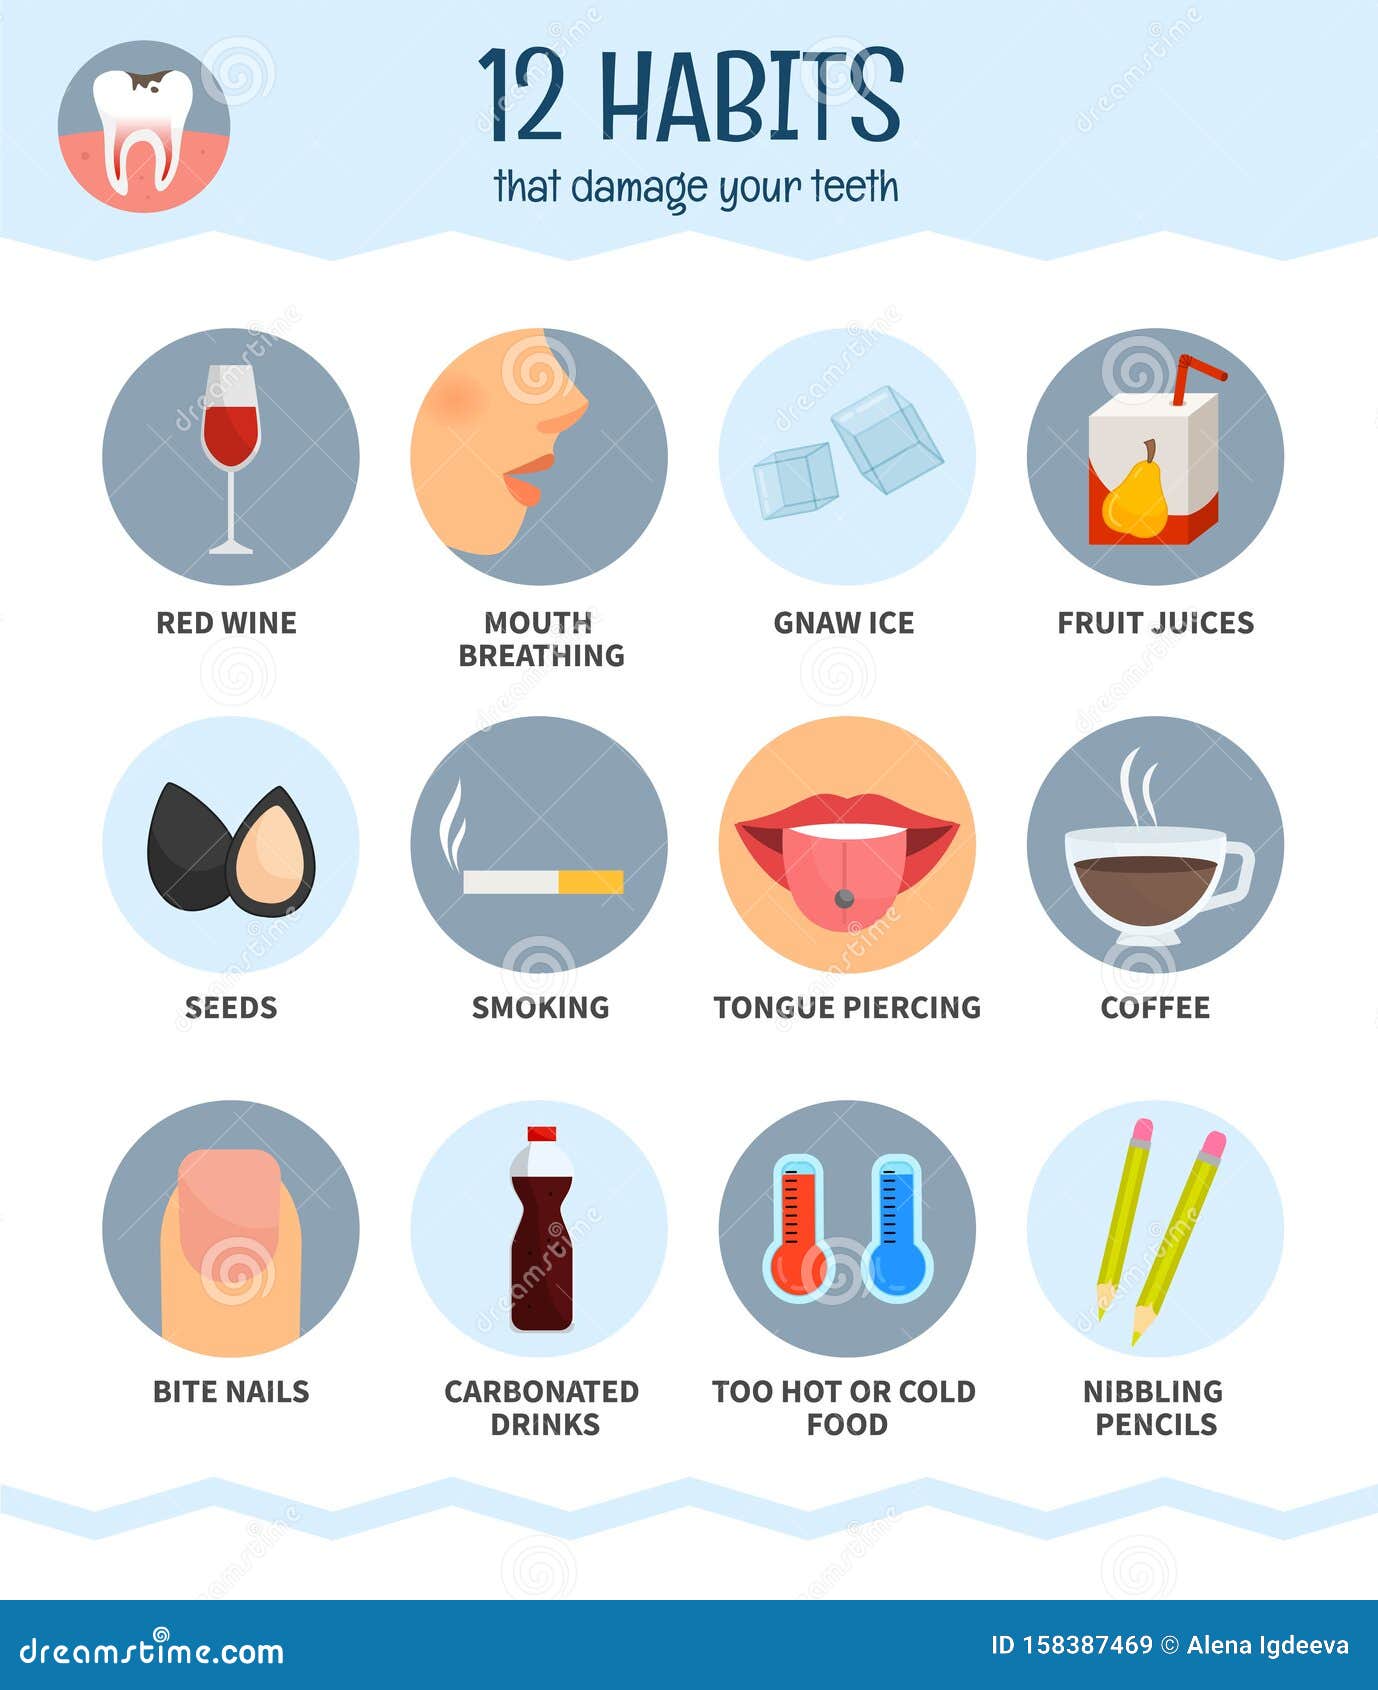  poster of 12 habits that destroy your teeth.